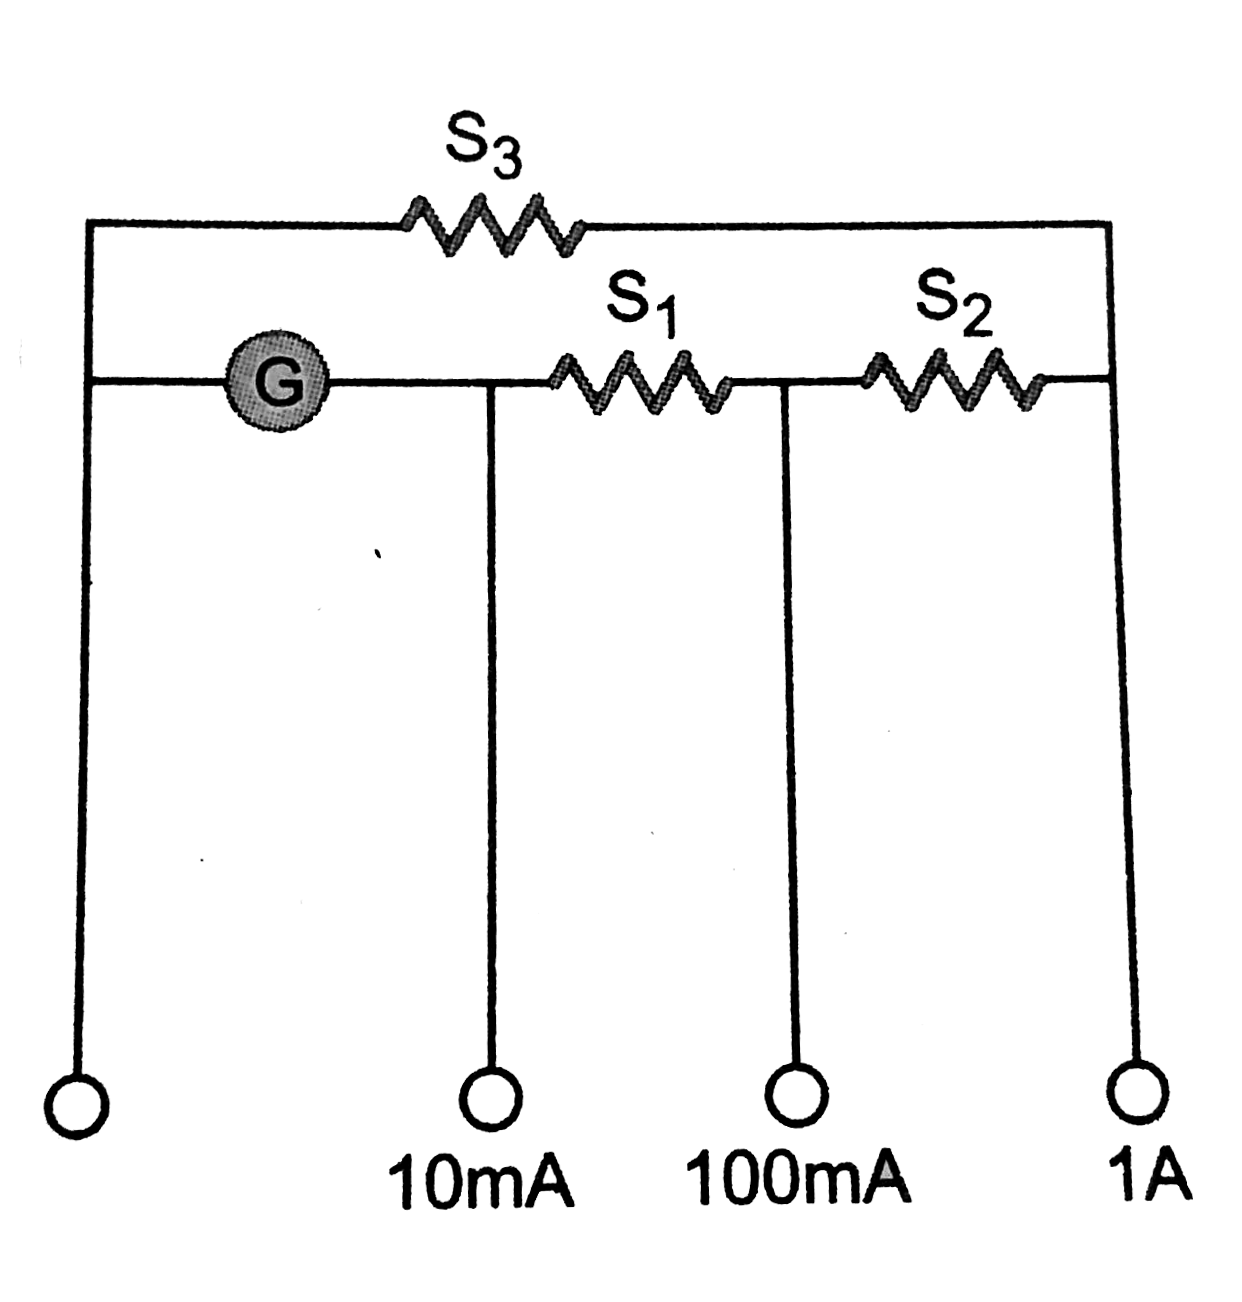 A multirange current meter can be constructed by using a galvanometer circuit as shown in figure. We want a current meter that can measure 10mA, 100mA and 1A using a galvanometer of resistance 10Omega and that produces maximum deflection for current of 1mA. Find S1, S2 and S3 that have to be used.